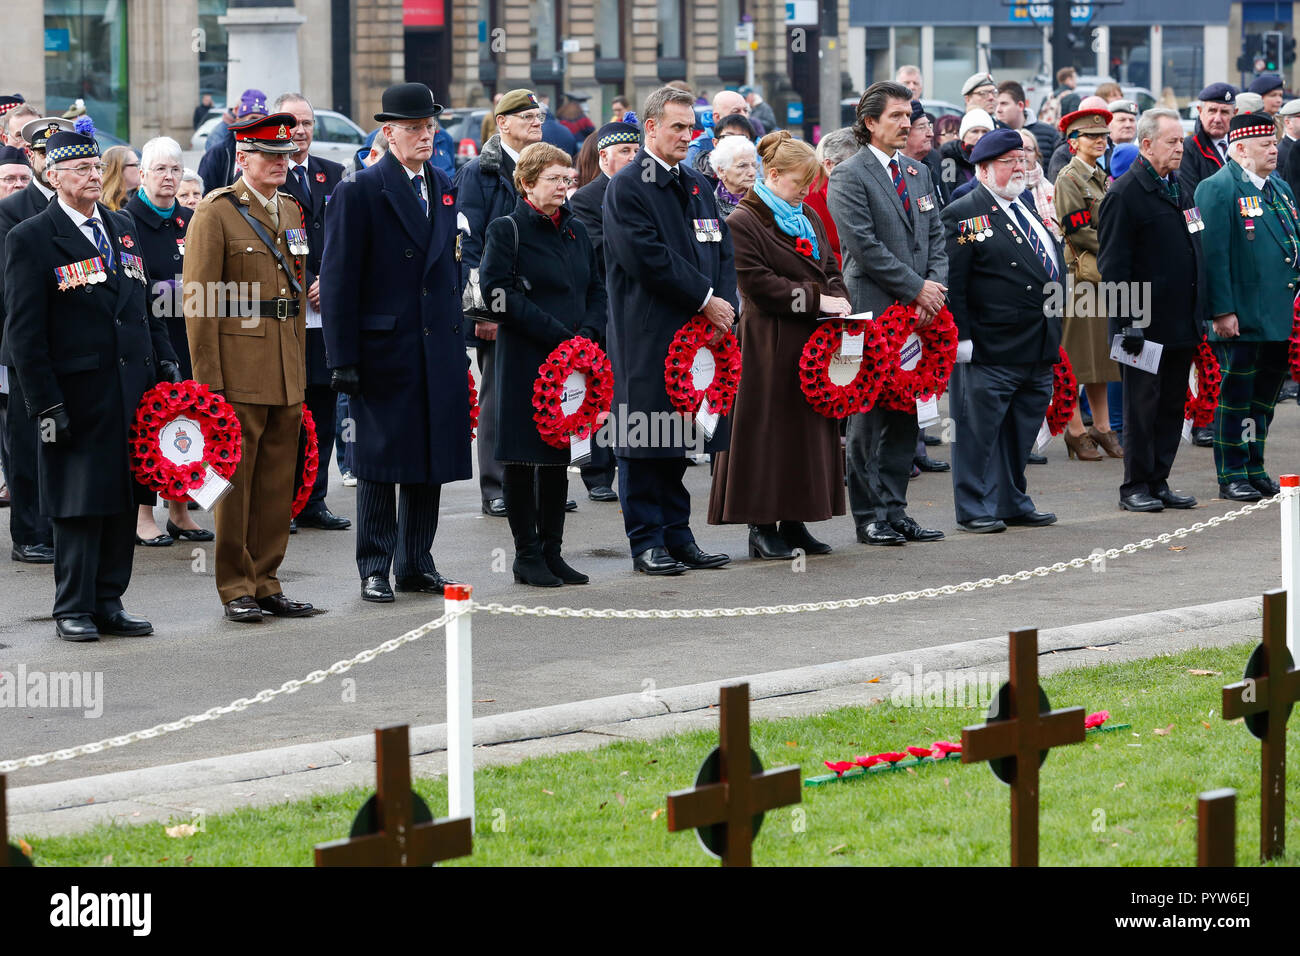 Glasgow, Scotland, UK. 30th October, 2018. Deputy Lord Lieutenant Mr Phil Green of the City of Glasgow led a special group of wreath-layers at the annual Opening Ceremony of the Glasgow Garden of Remembrance, in George Square. Members of the Armed Forces community including veterans attended the poignant event which marks the start of the traditional two week Remembrance period. Credit: Findlay/Alamy Live News Stock Photo